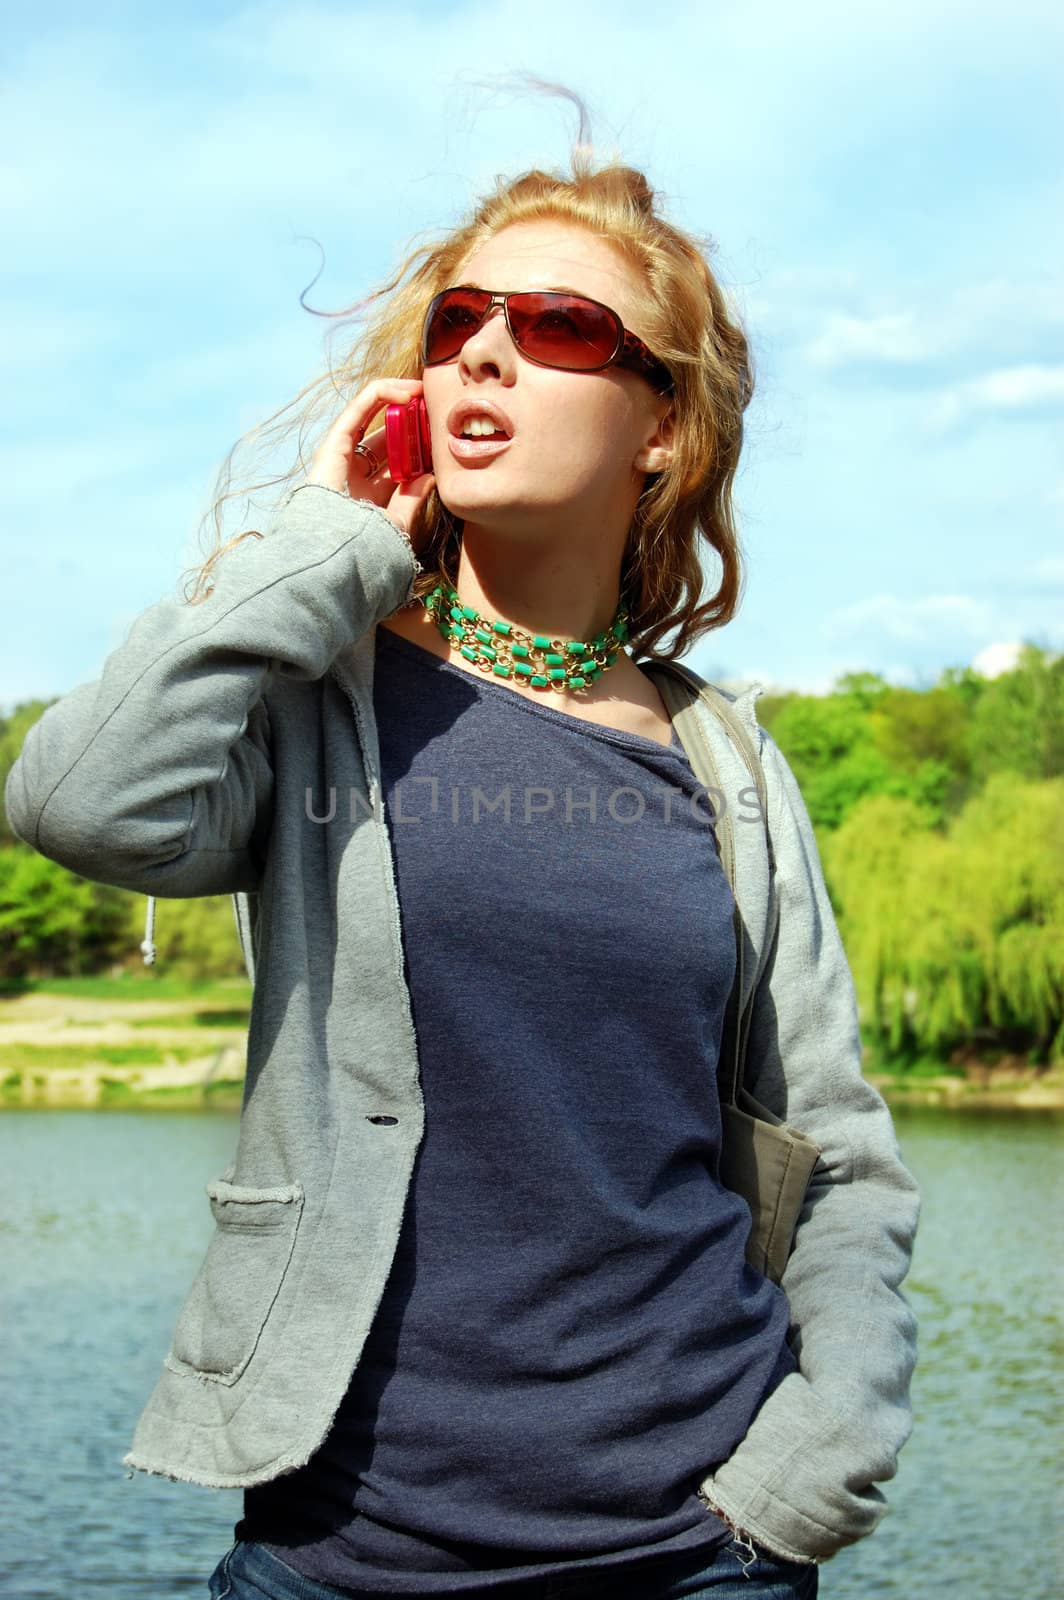 Girl talking on the phone on nature background